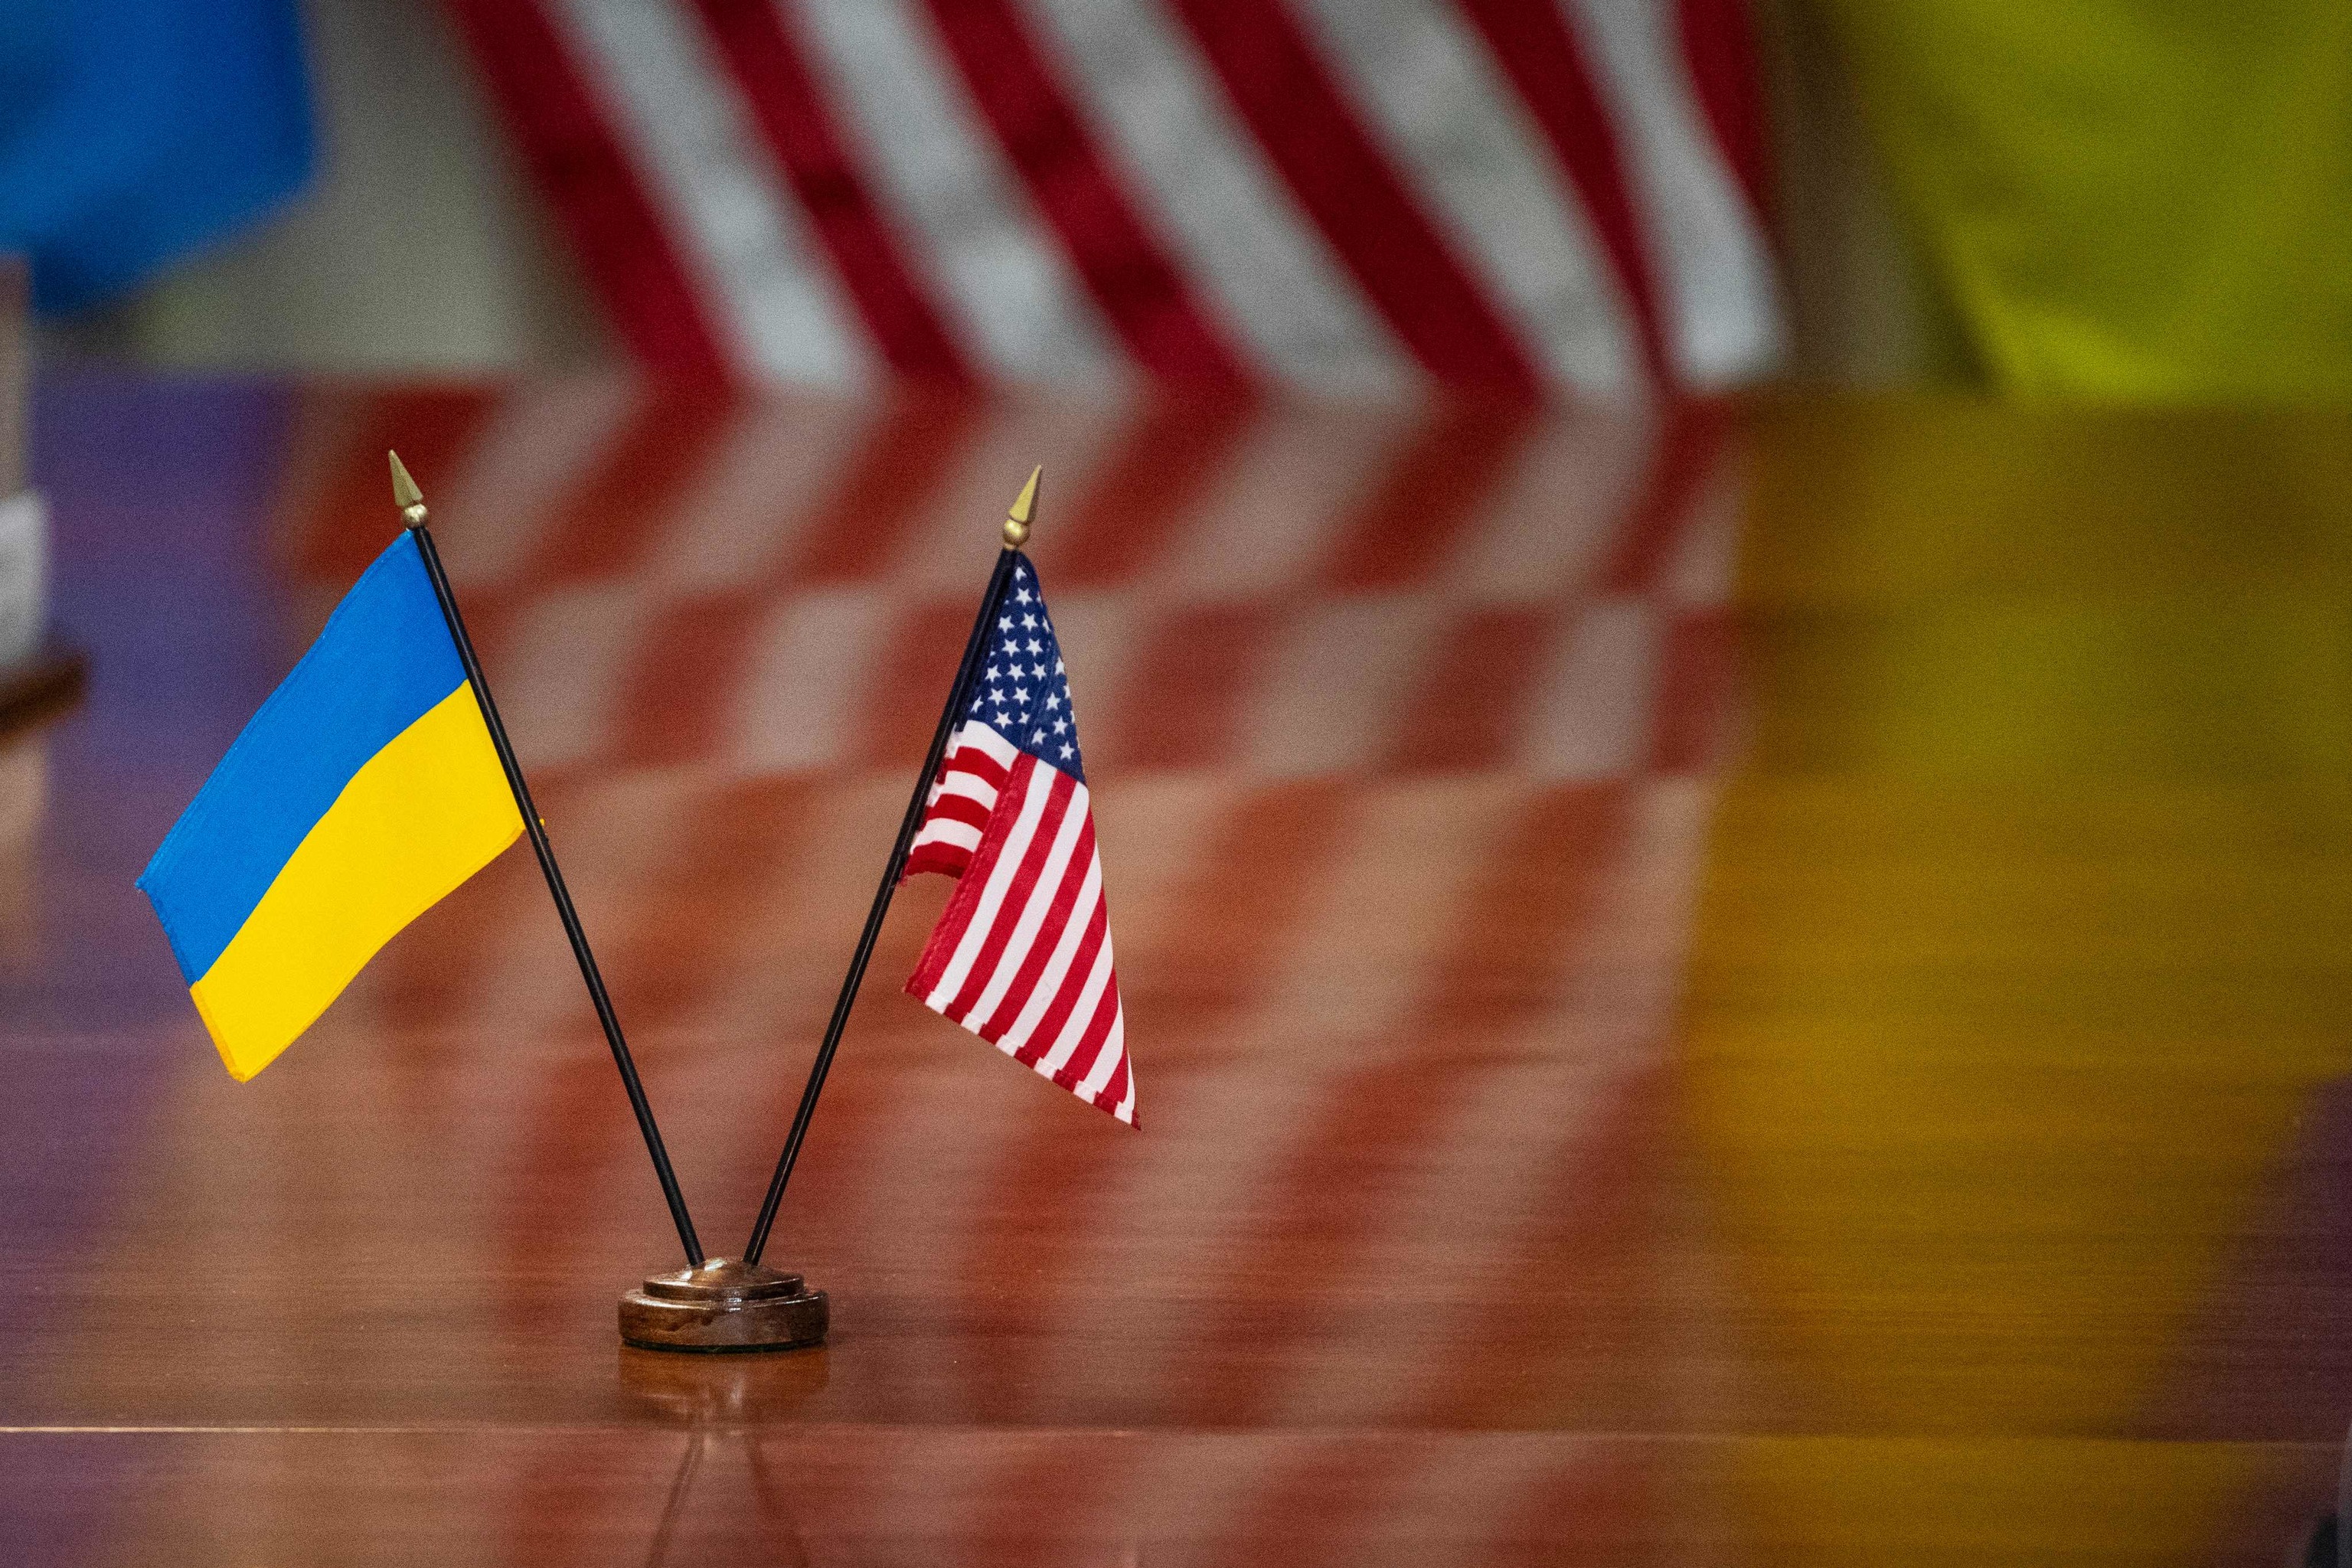 The national flags of Ukraine and the United States appear during a meeting